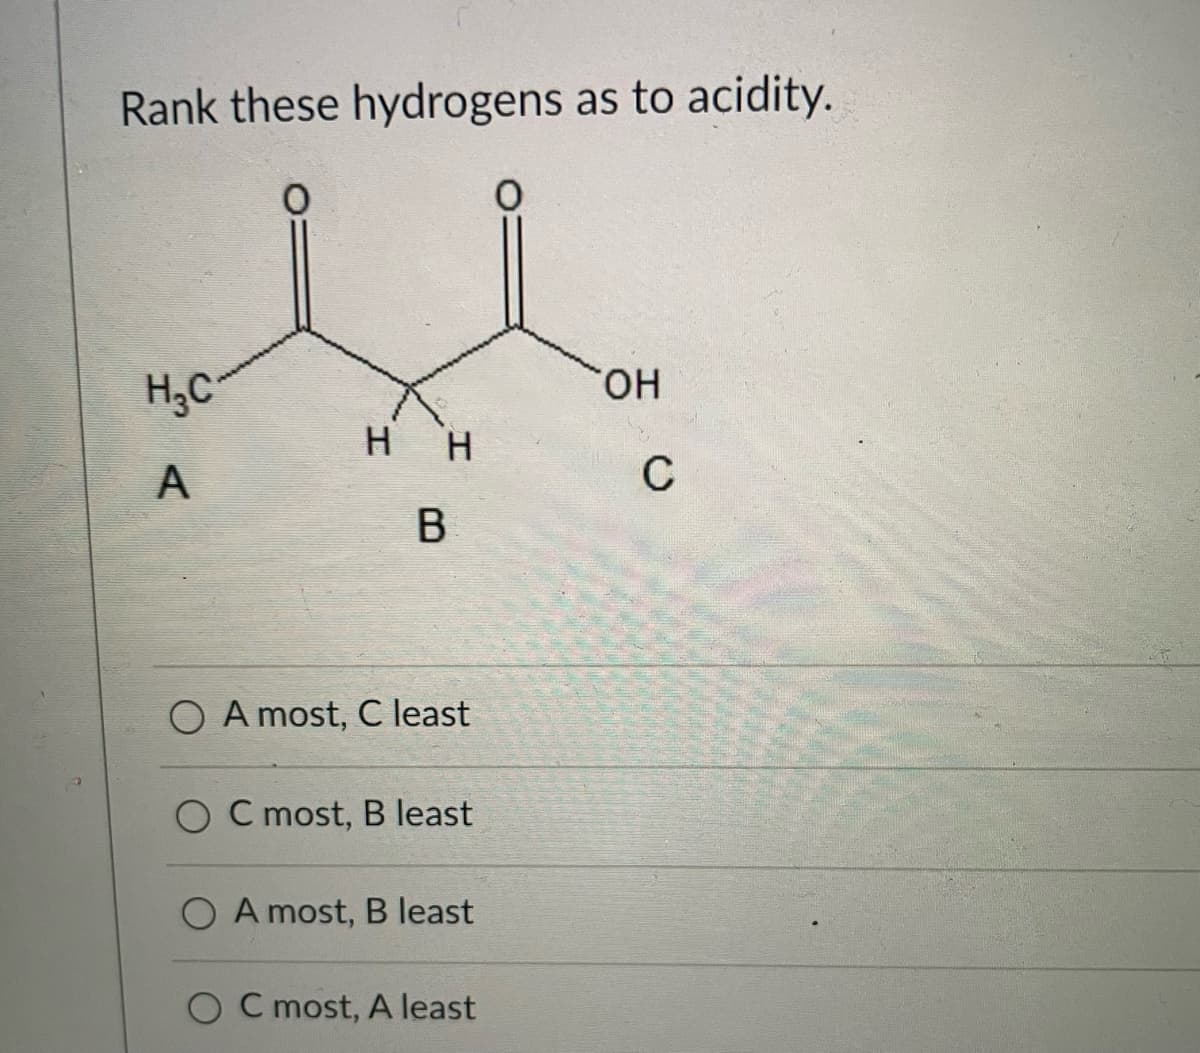 Rank these hydrogens as to acidity.
H;C
HO.
нн
A
C
B
A most, C least
O C most, B least
O A most, B least
C most, A least
